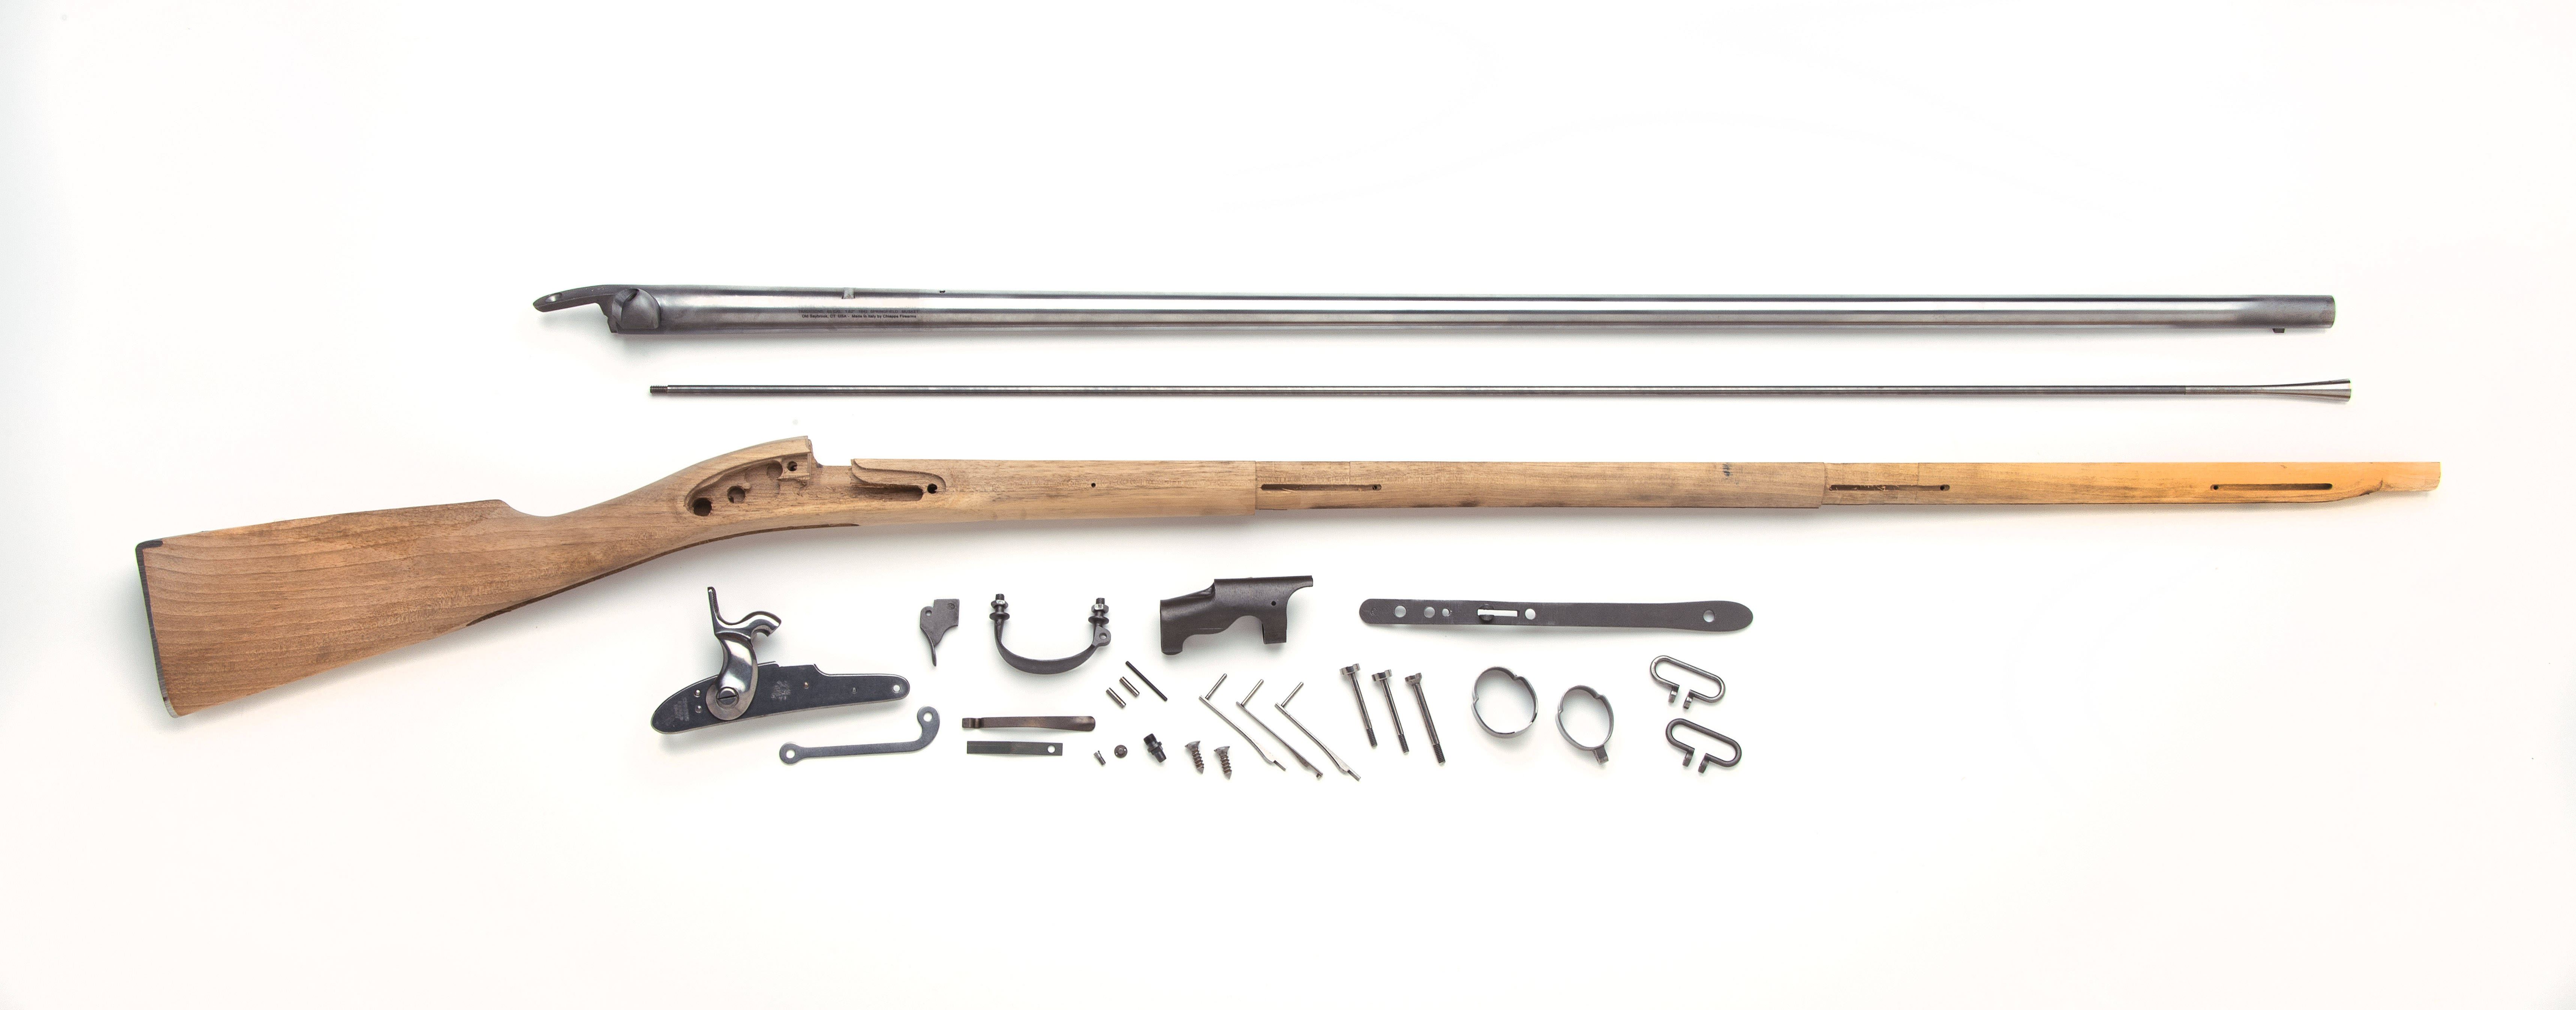 1842 Springfield Musket .69 Caliber Smoothbore Build It Yourself Kit KR6184200